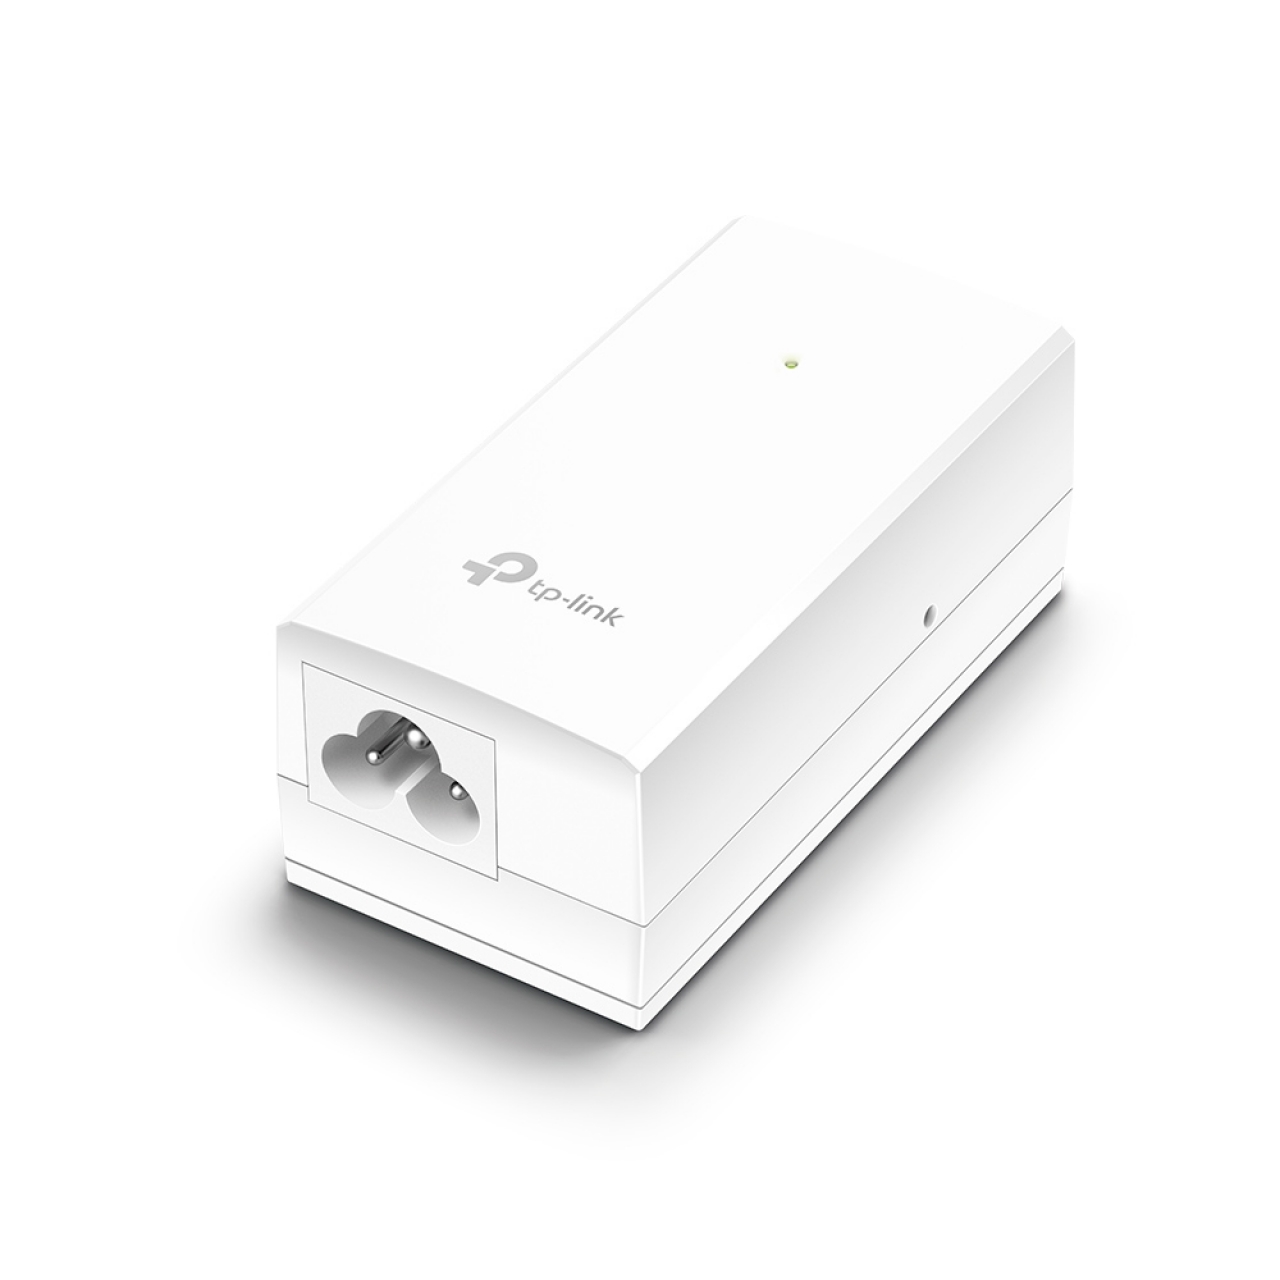 TP-LINK TL-POE2412G Passive PoE Adapter